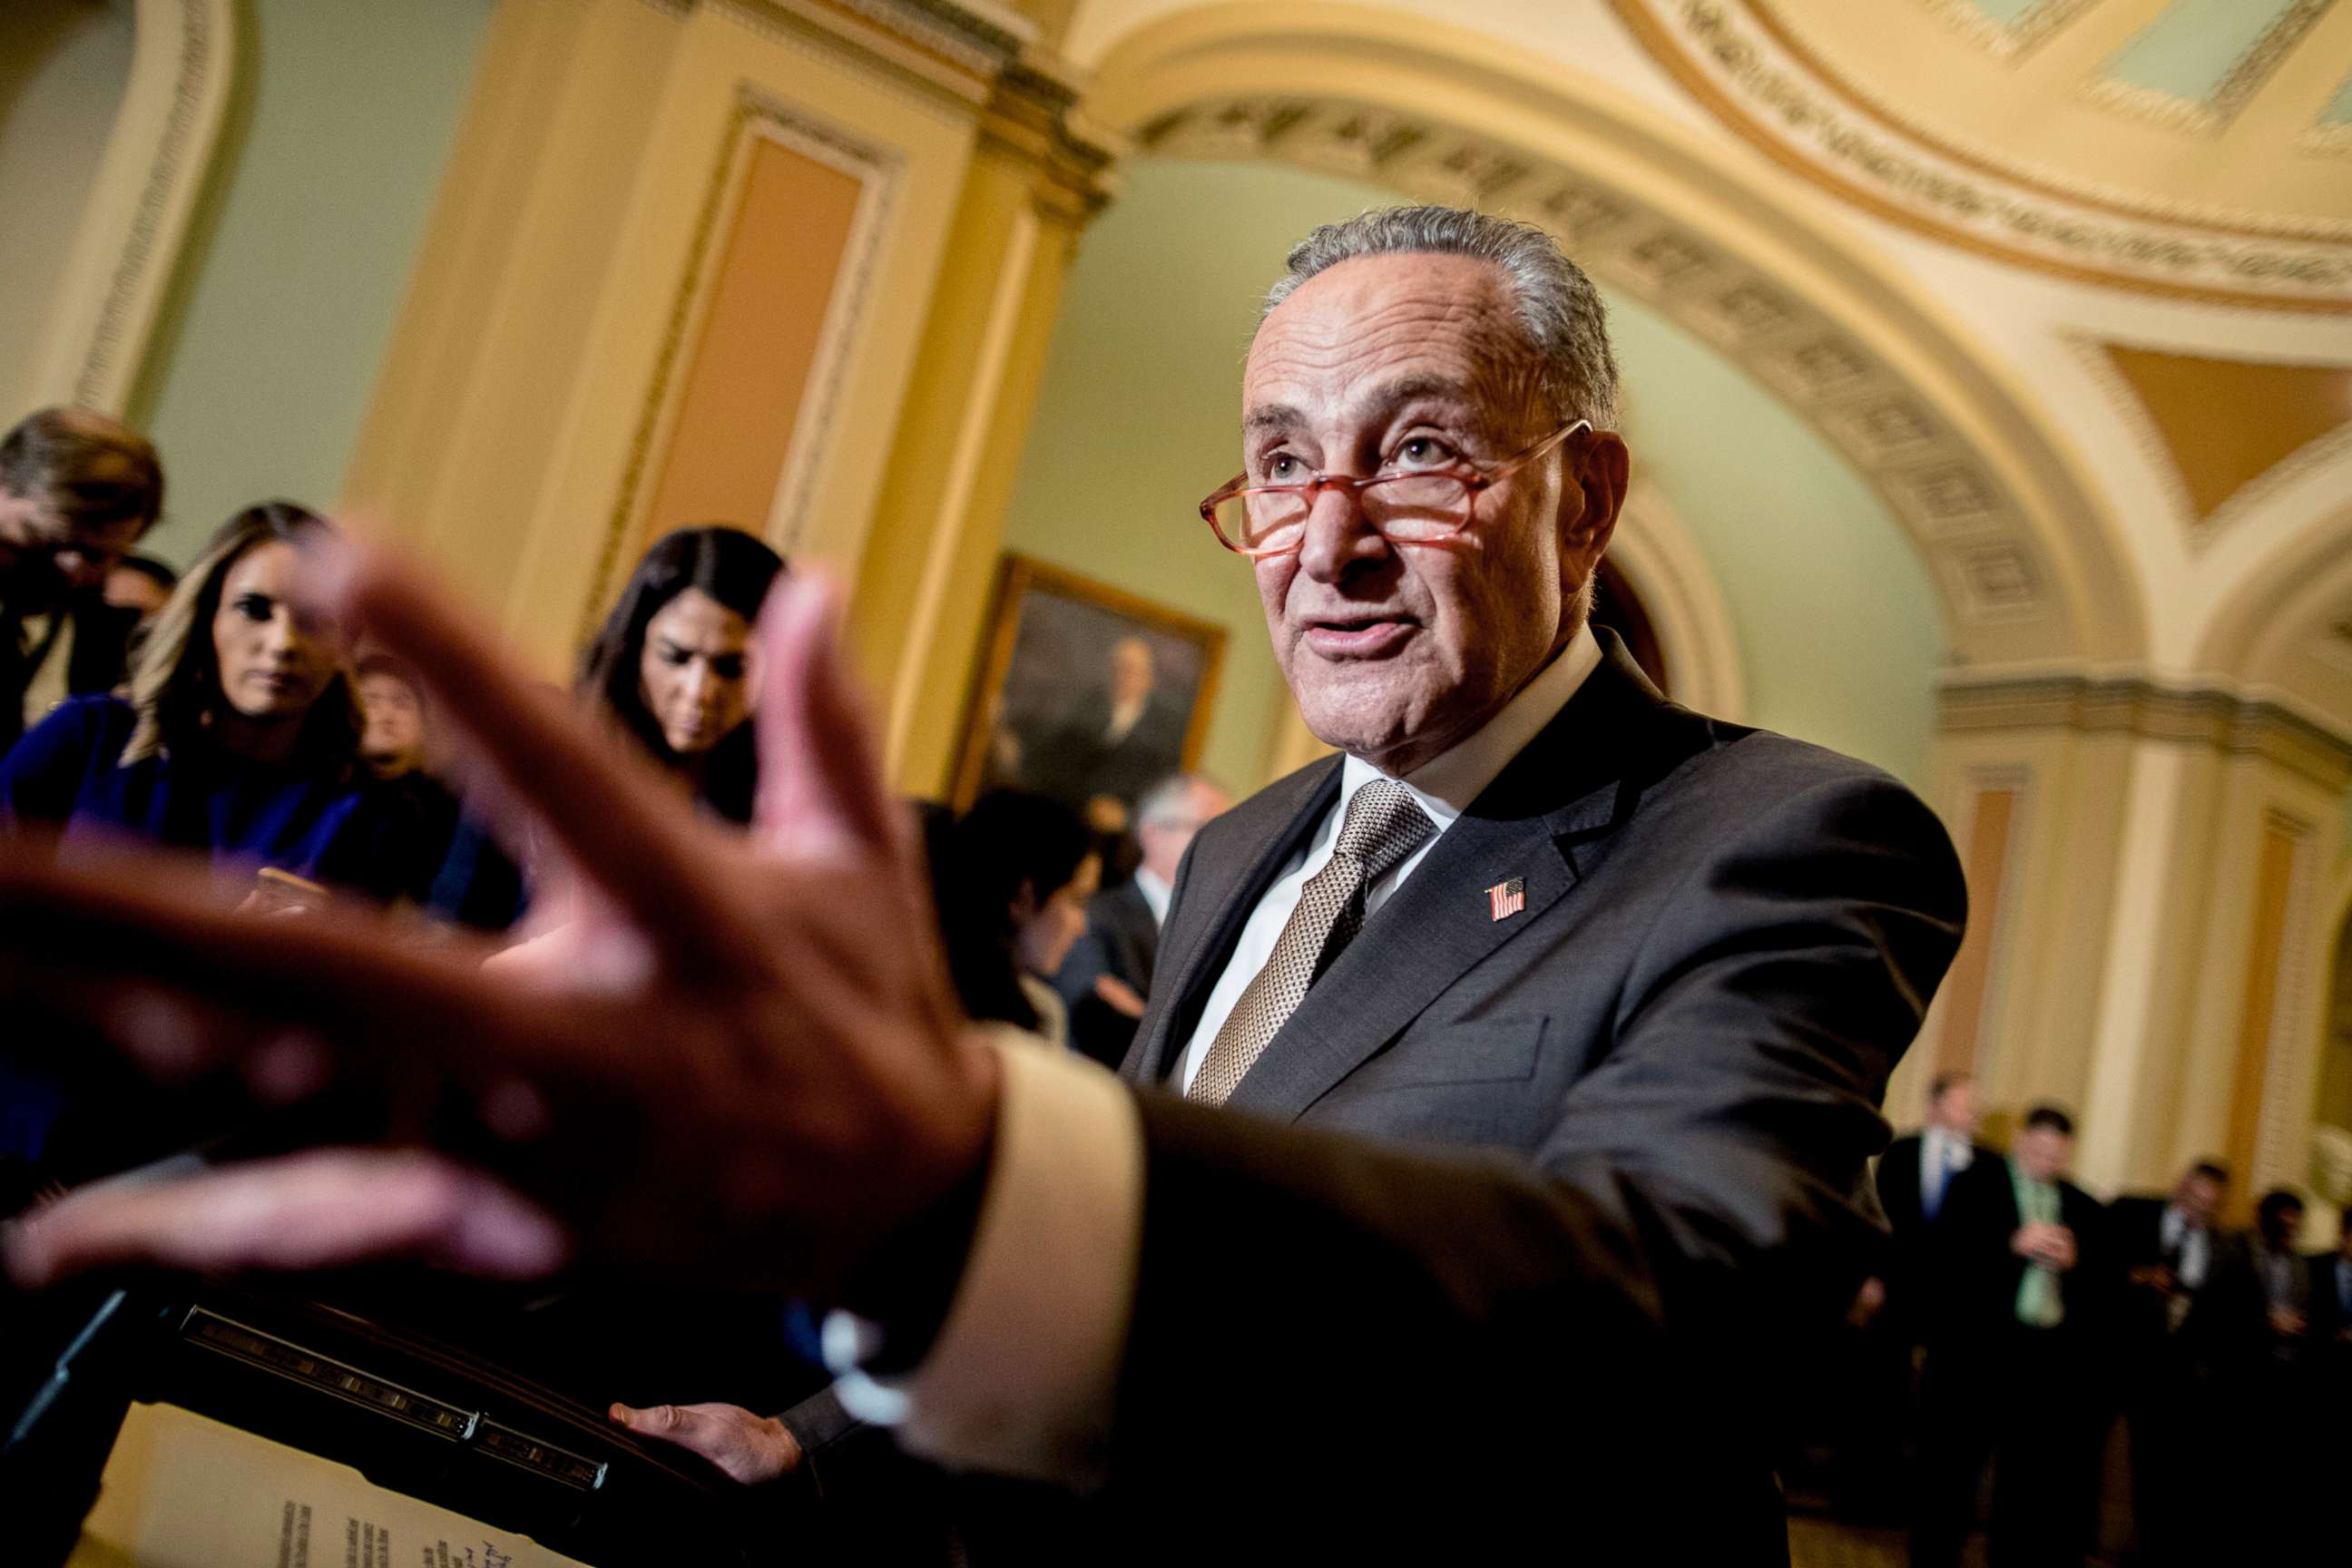 PHOTO: Senate Minority Leader Sen. Chuck Schumer speaks to reporters during a news conference, Dec. 10, 2019, on Capitol Hill in Washington.